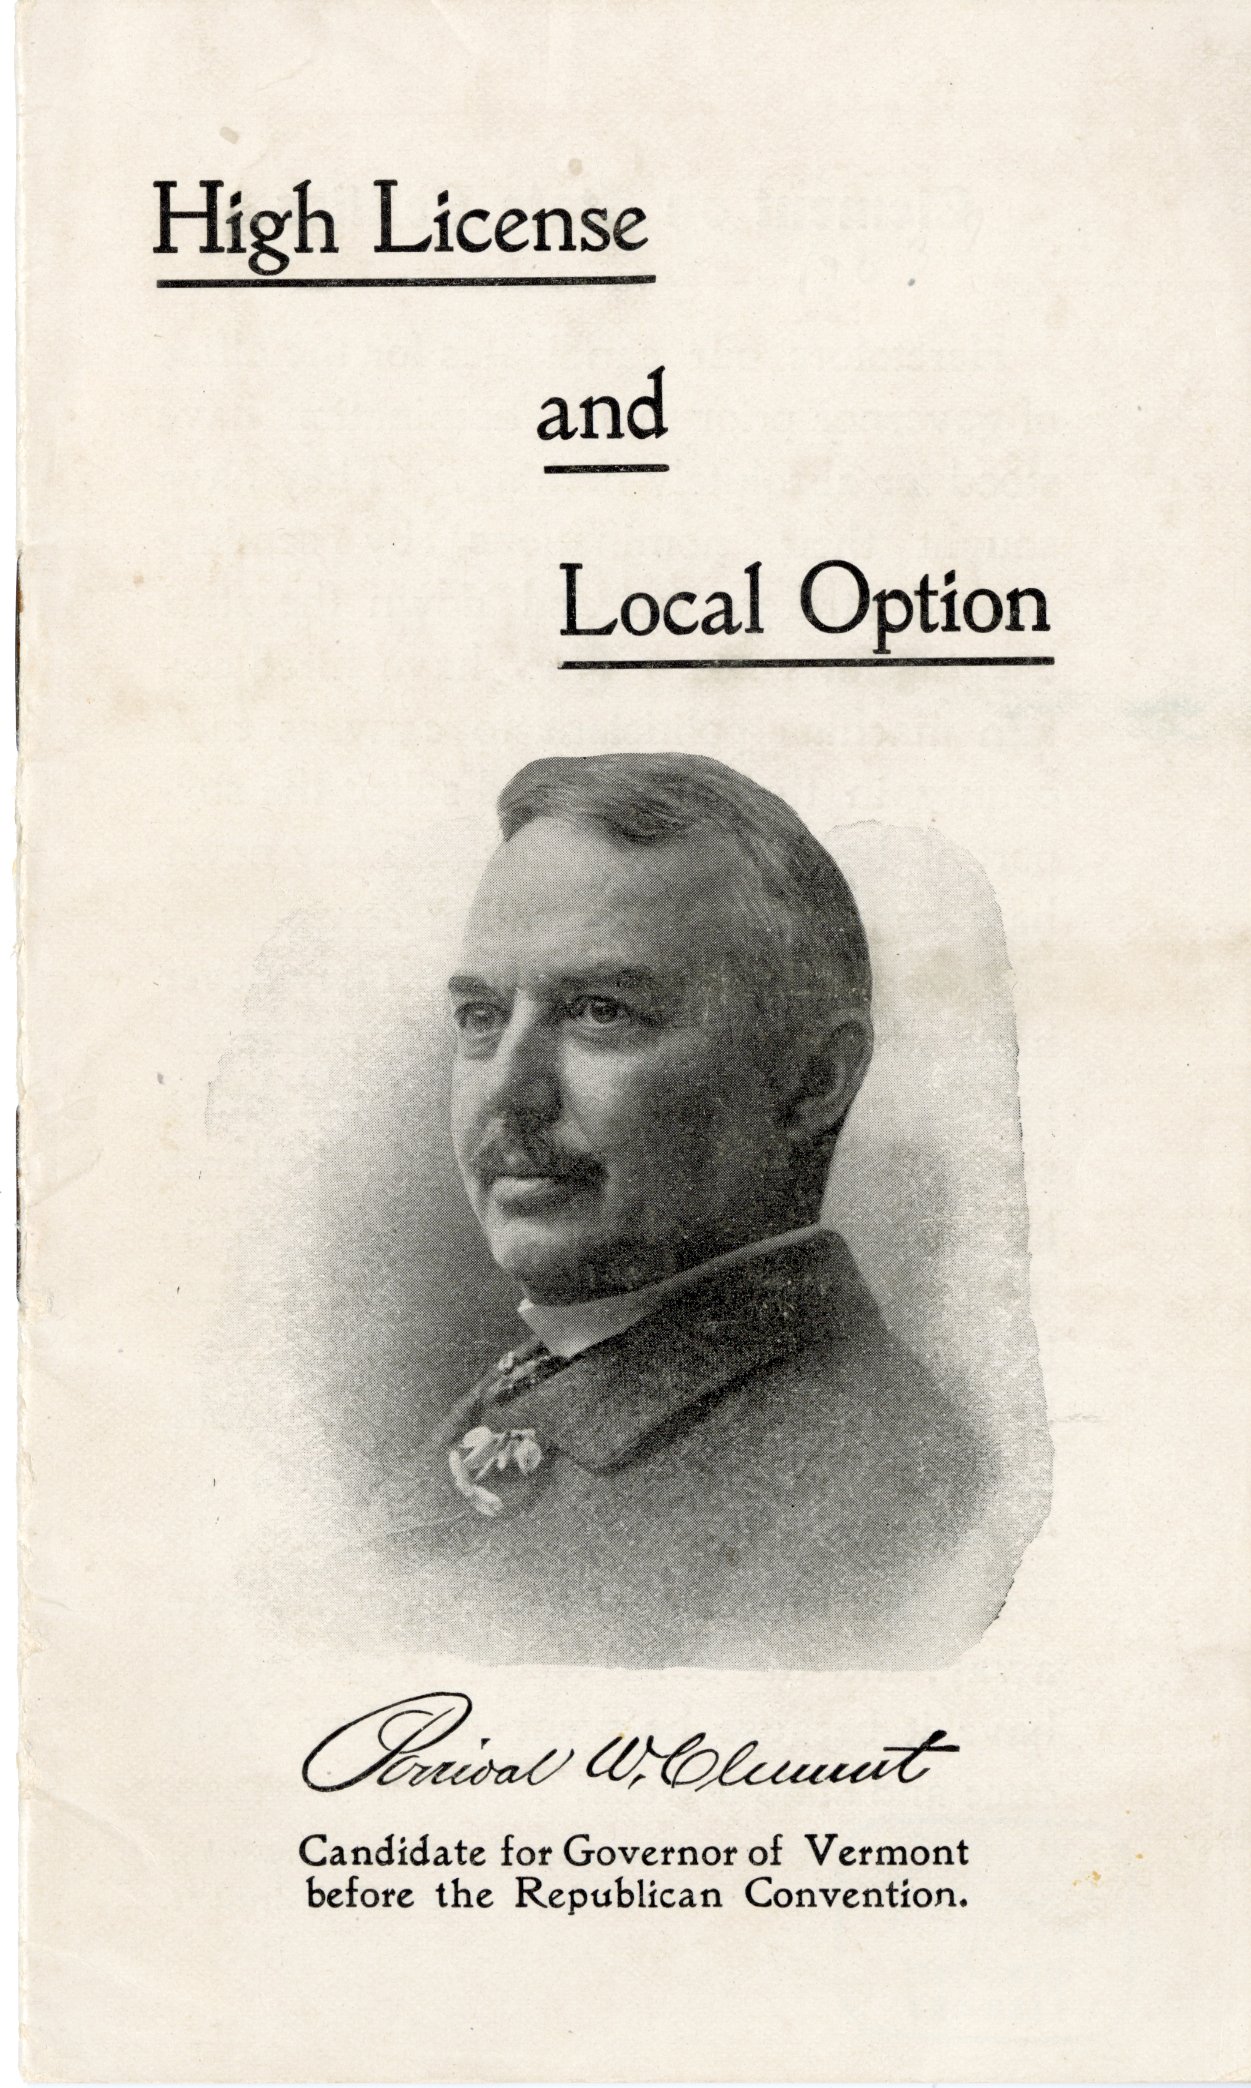 Front cover of a campaign brochure with the title "High License and Local Option" with a photograph of Percival Clement, candidate for governor of Vermont.